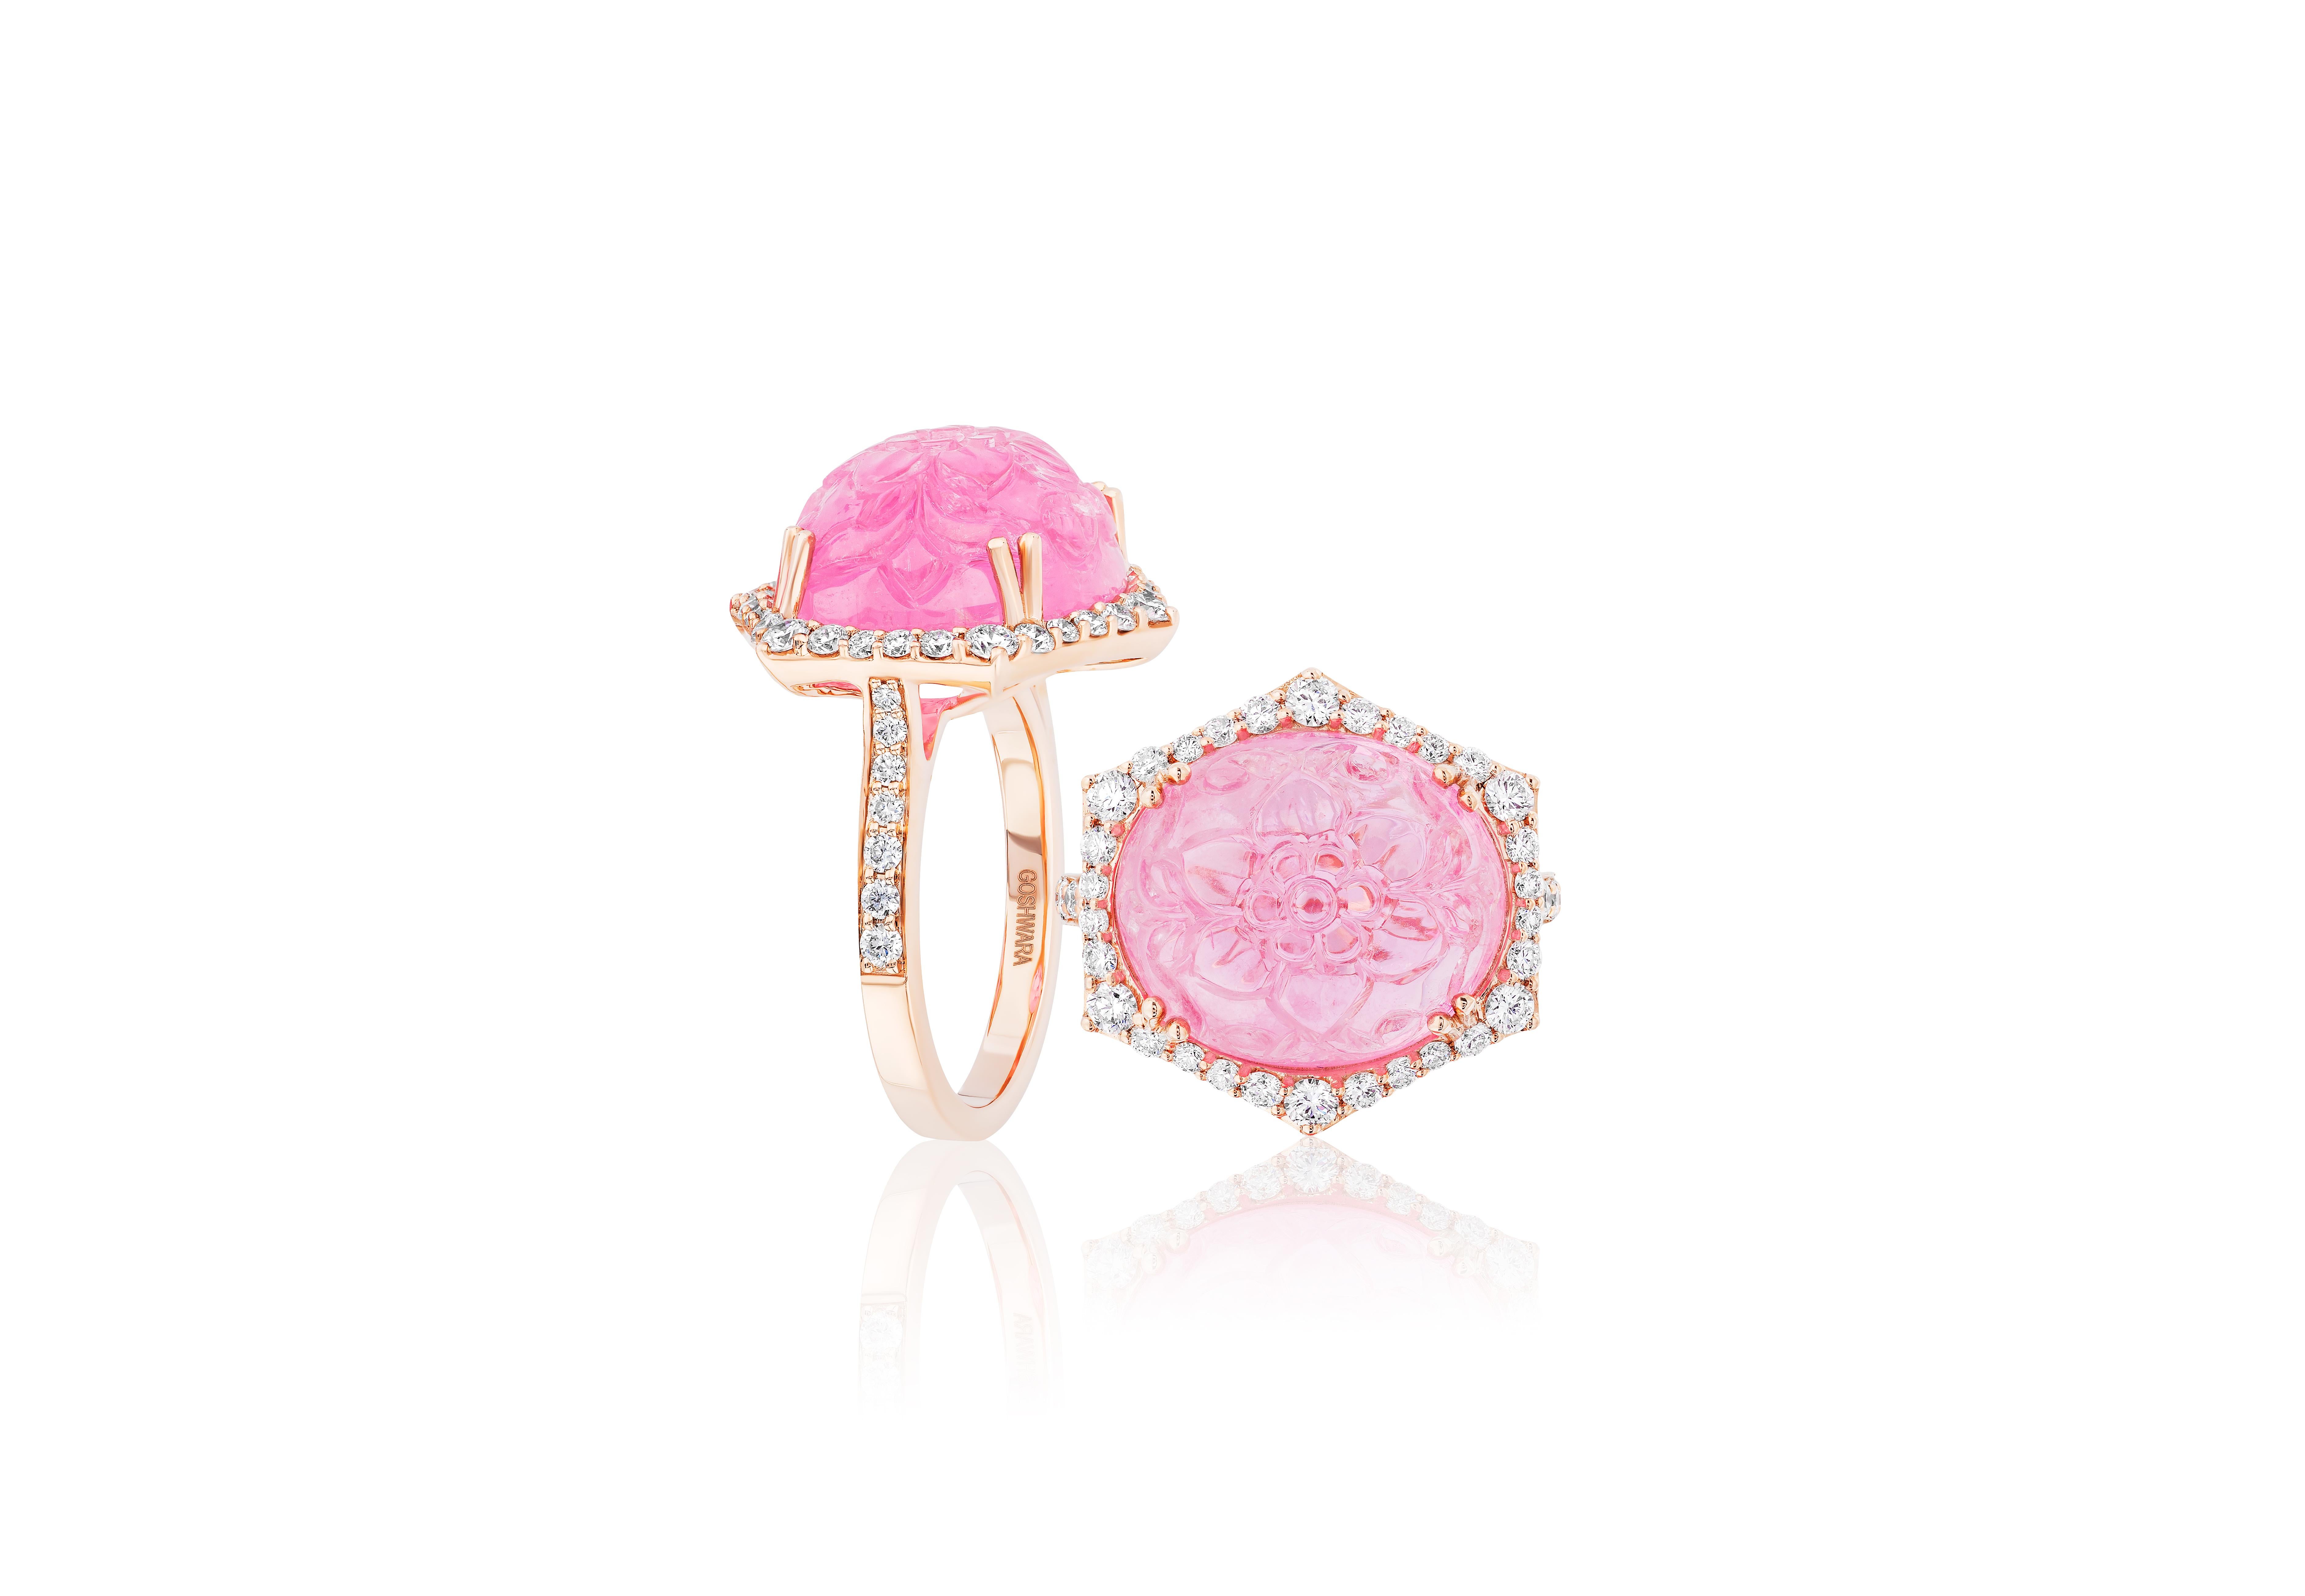 Carved Tourmaline Cabochon Ring with Diamonds in 18K Rose Gold, from ‘G-One' Collection. Perfect cocktail ring to dazzle. If you love pink, don’t wait longer, this is the one!

* Gemstone: 100% Earth Mined 
* Approx. gemstone Weight: 13.81 Carats